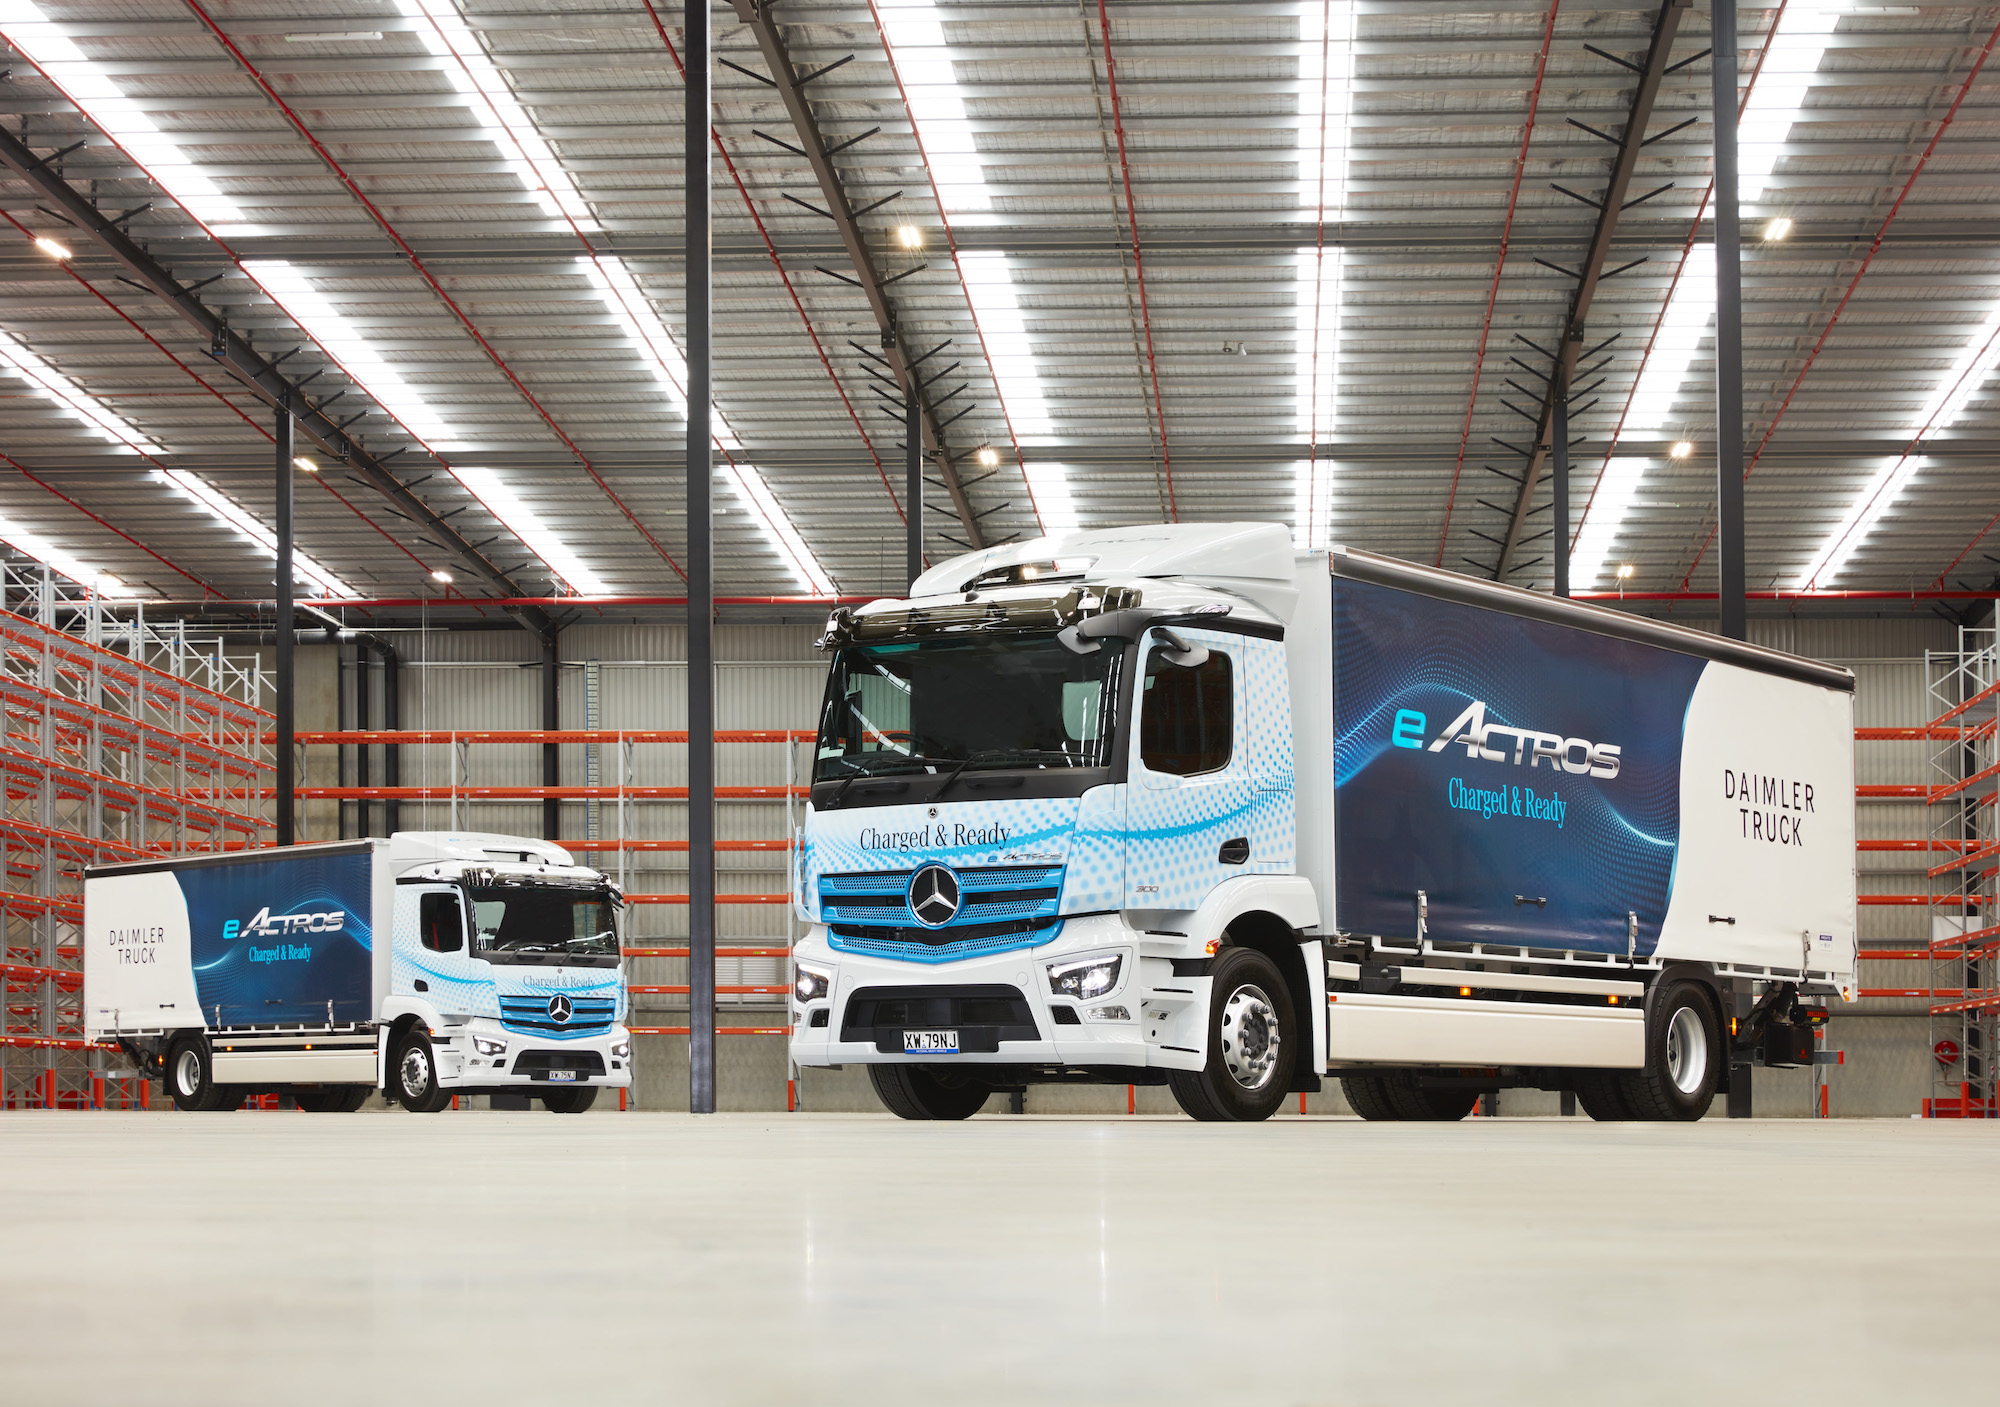 Daimler Truck is welcoming the new Australian Design Rule (ADR) announced for a zero-emissions truck safety feature, but says pedestrians still need more protection.